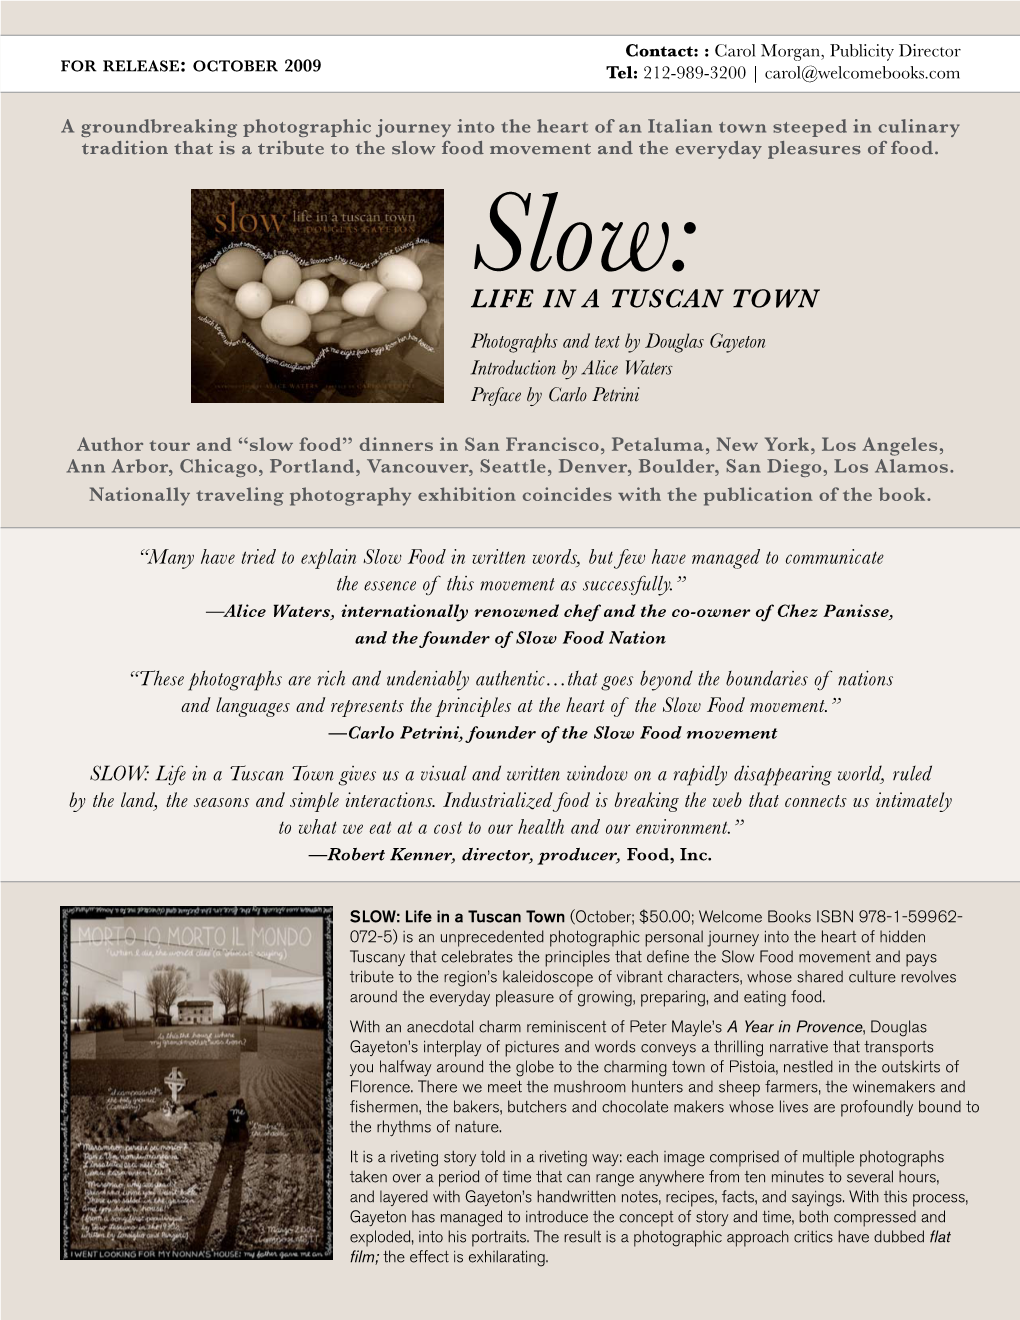 Slow: LIFE in a TUSCAN TOWN Photographs and Text by Douglas Gayeton Introduction by Alice Waters Preface by Carlo Petrini